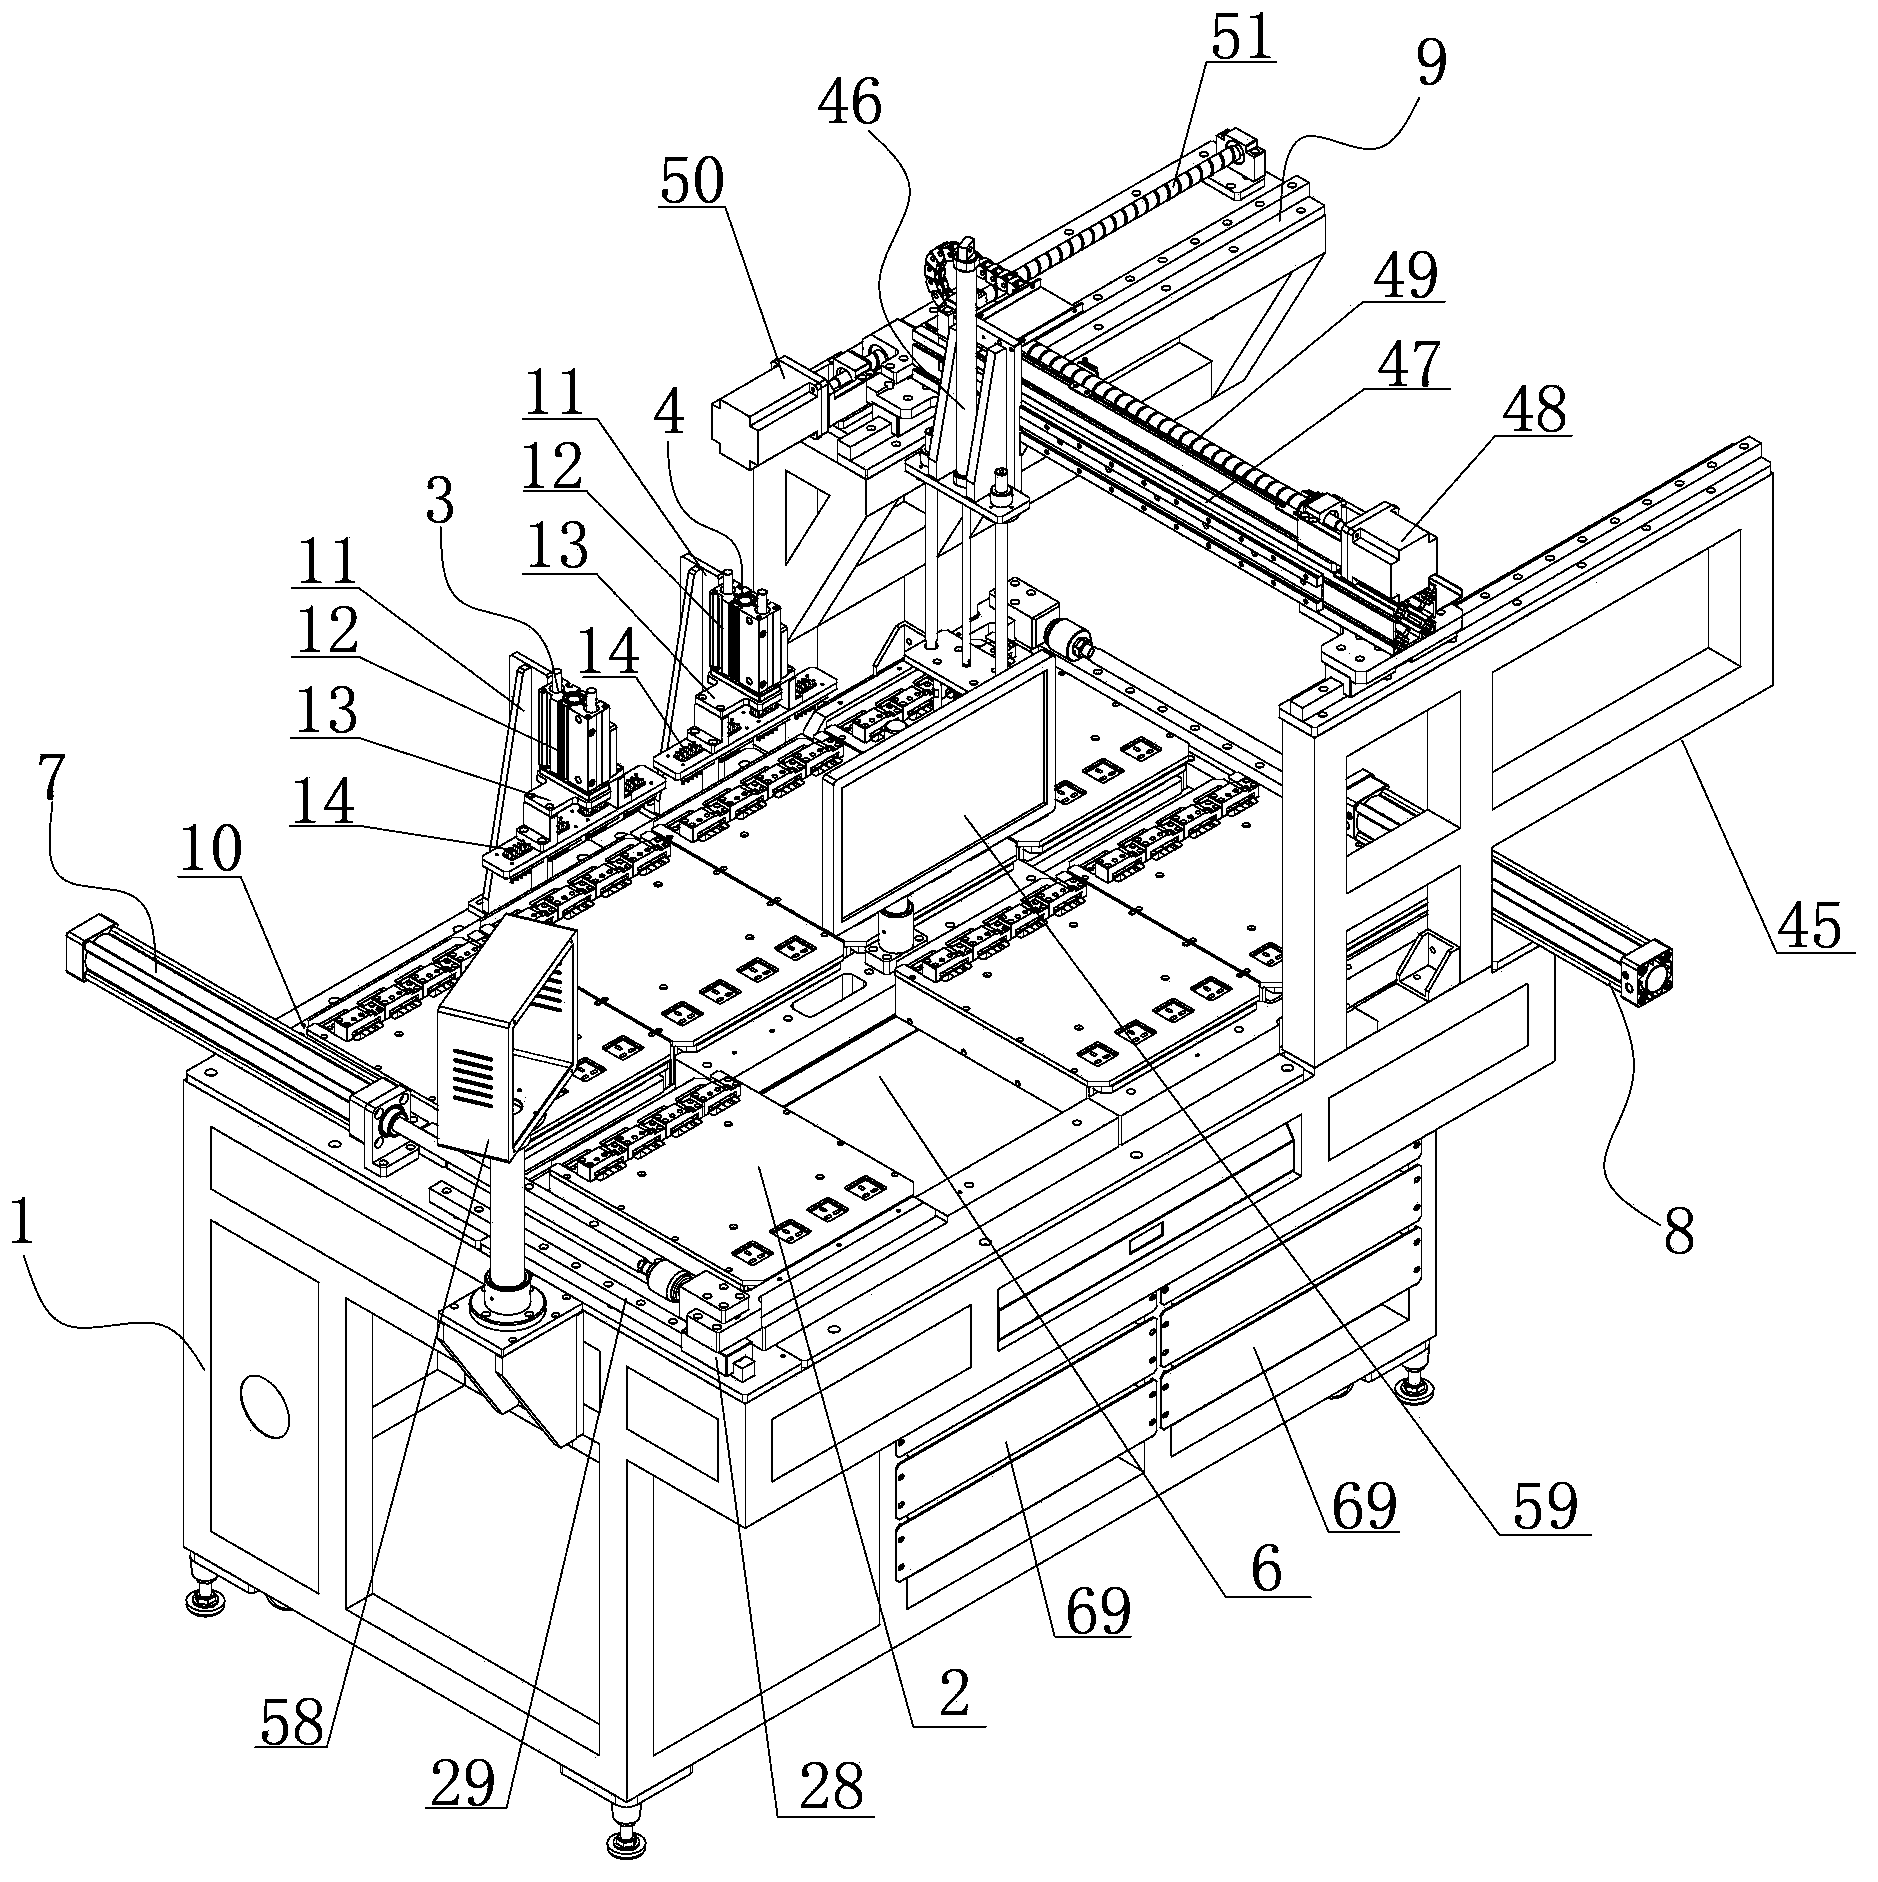 Multi-station automatic detection apparatus for electronic products